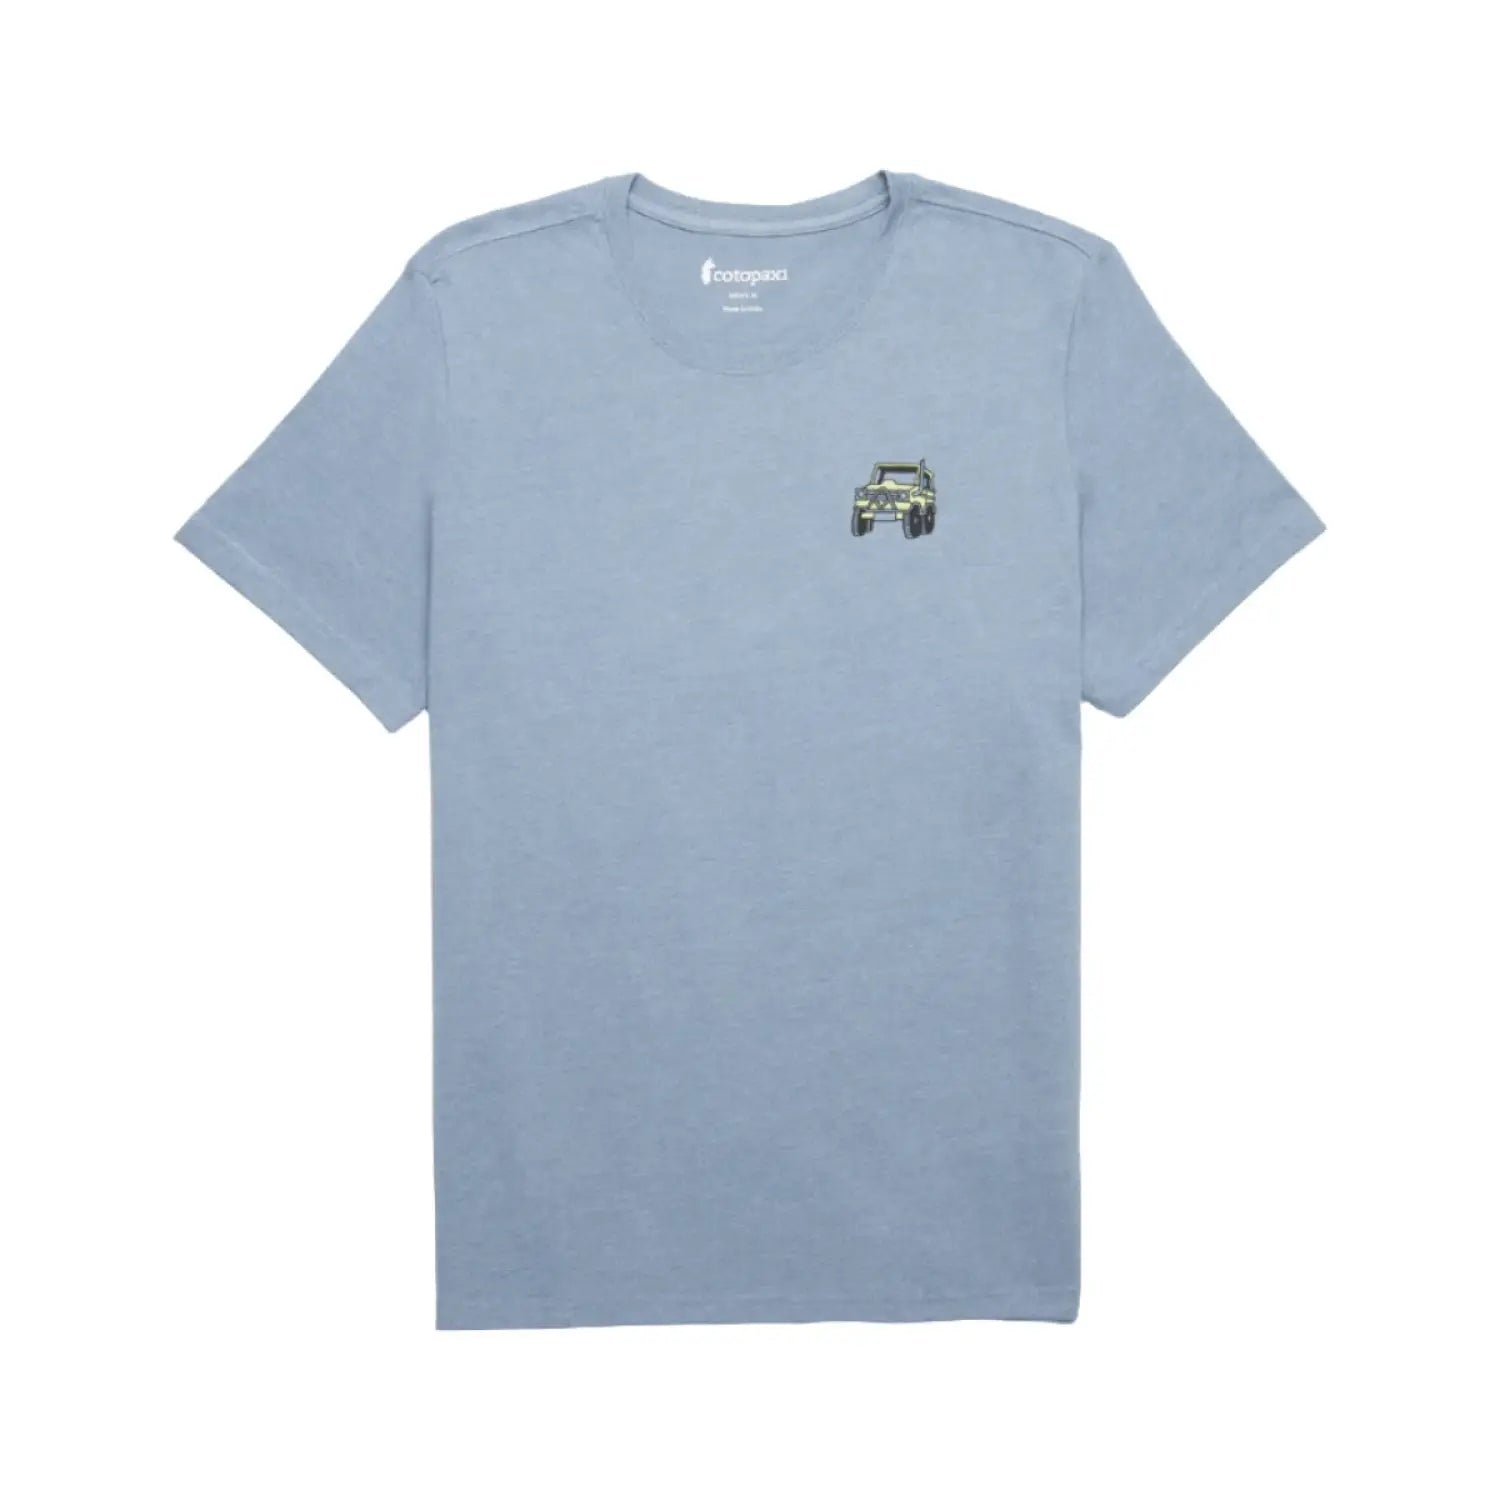 Cotopaxi M's Slice of Adventure T-Shirt, Tempest, front view flat 